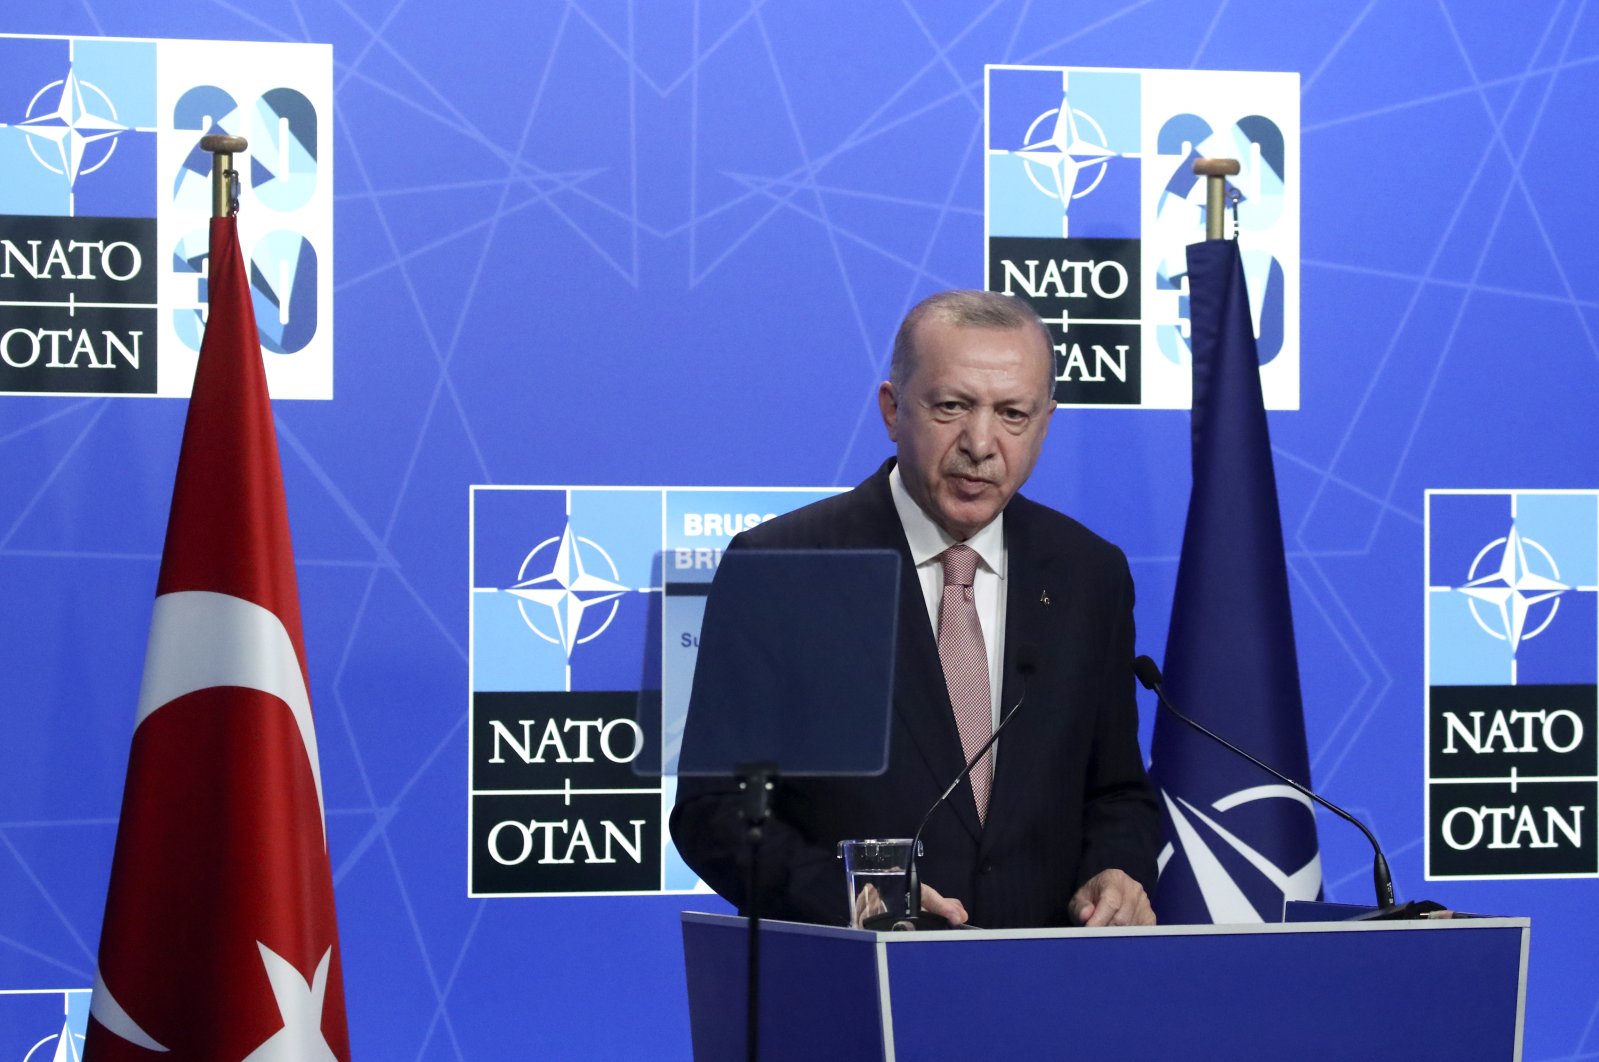 President Recep Tayyip Erdoğan speaks during a media conference at a NATO summit in Brussels, Belgium, June 14, 2021. (AP Photo)